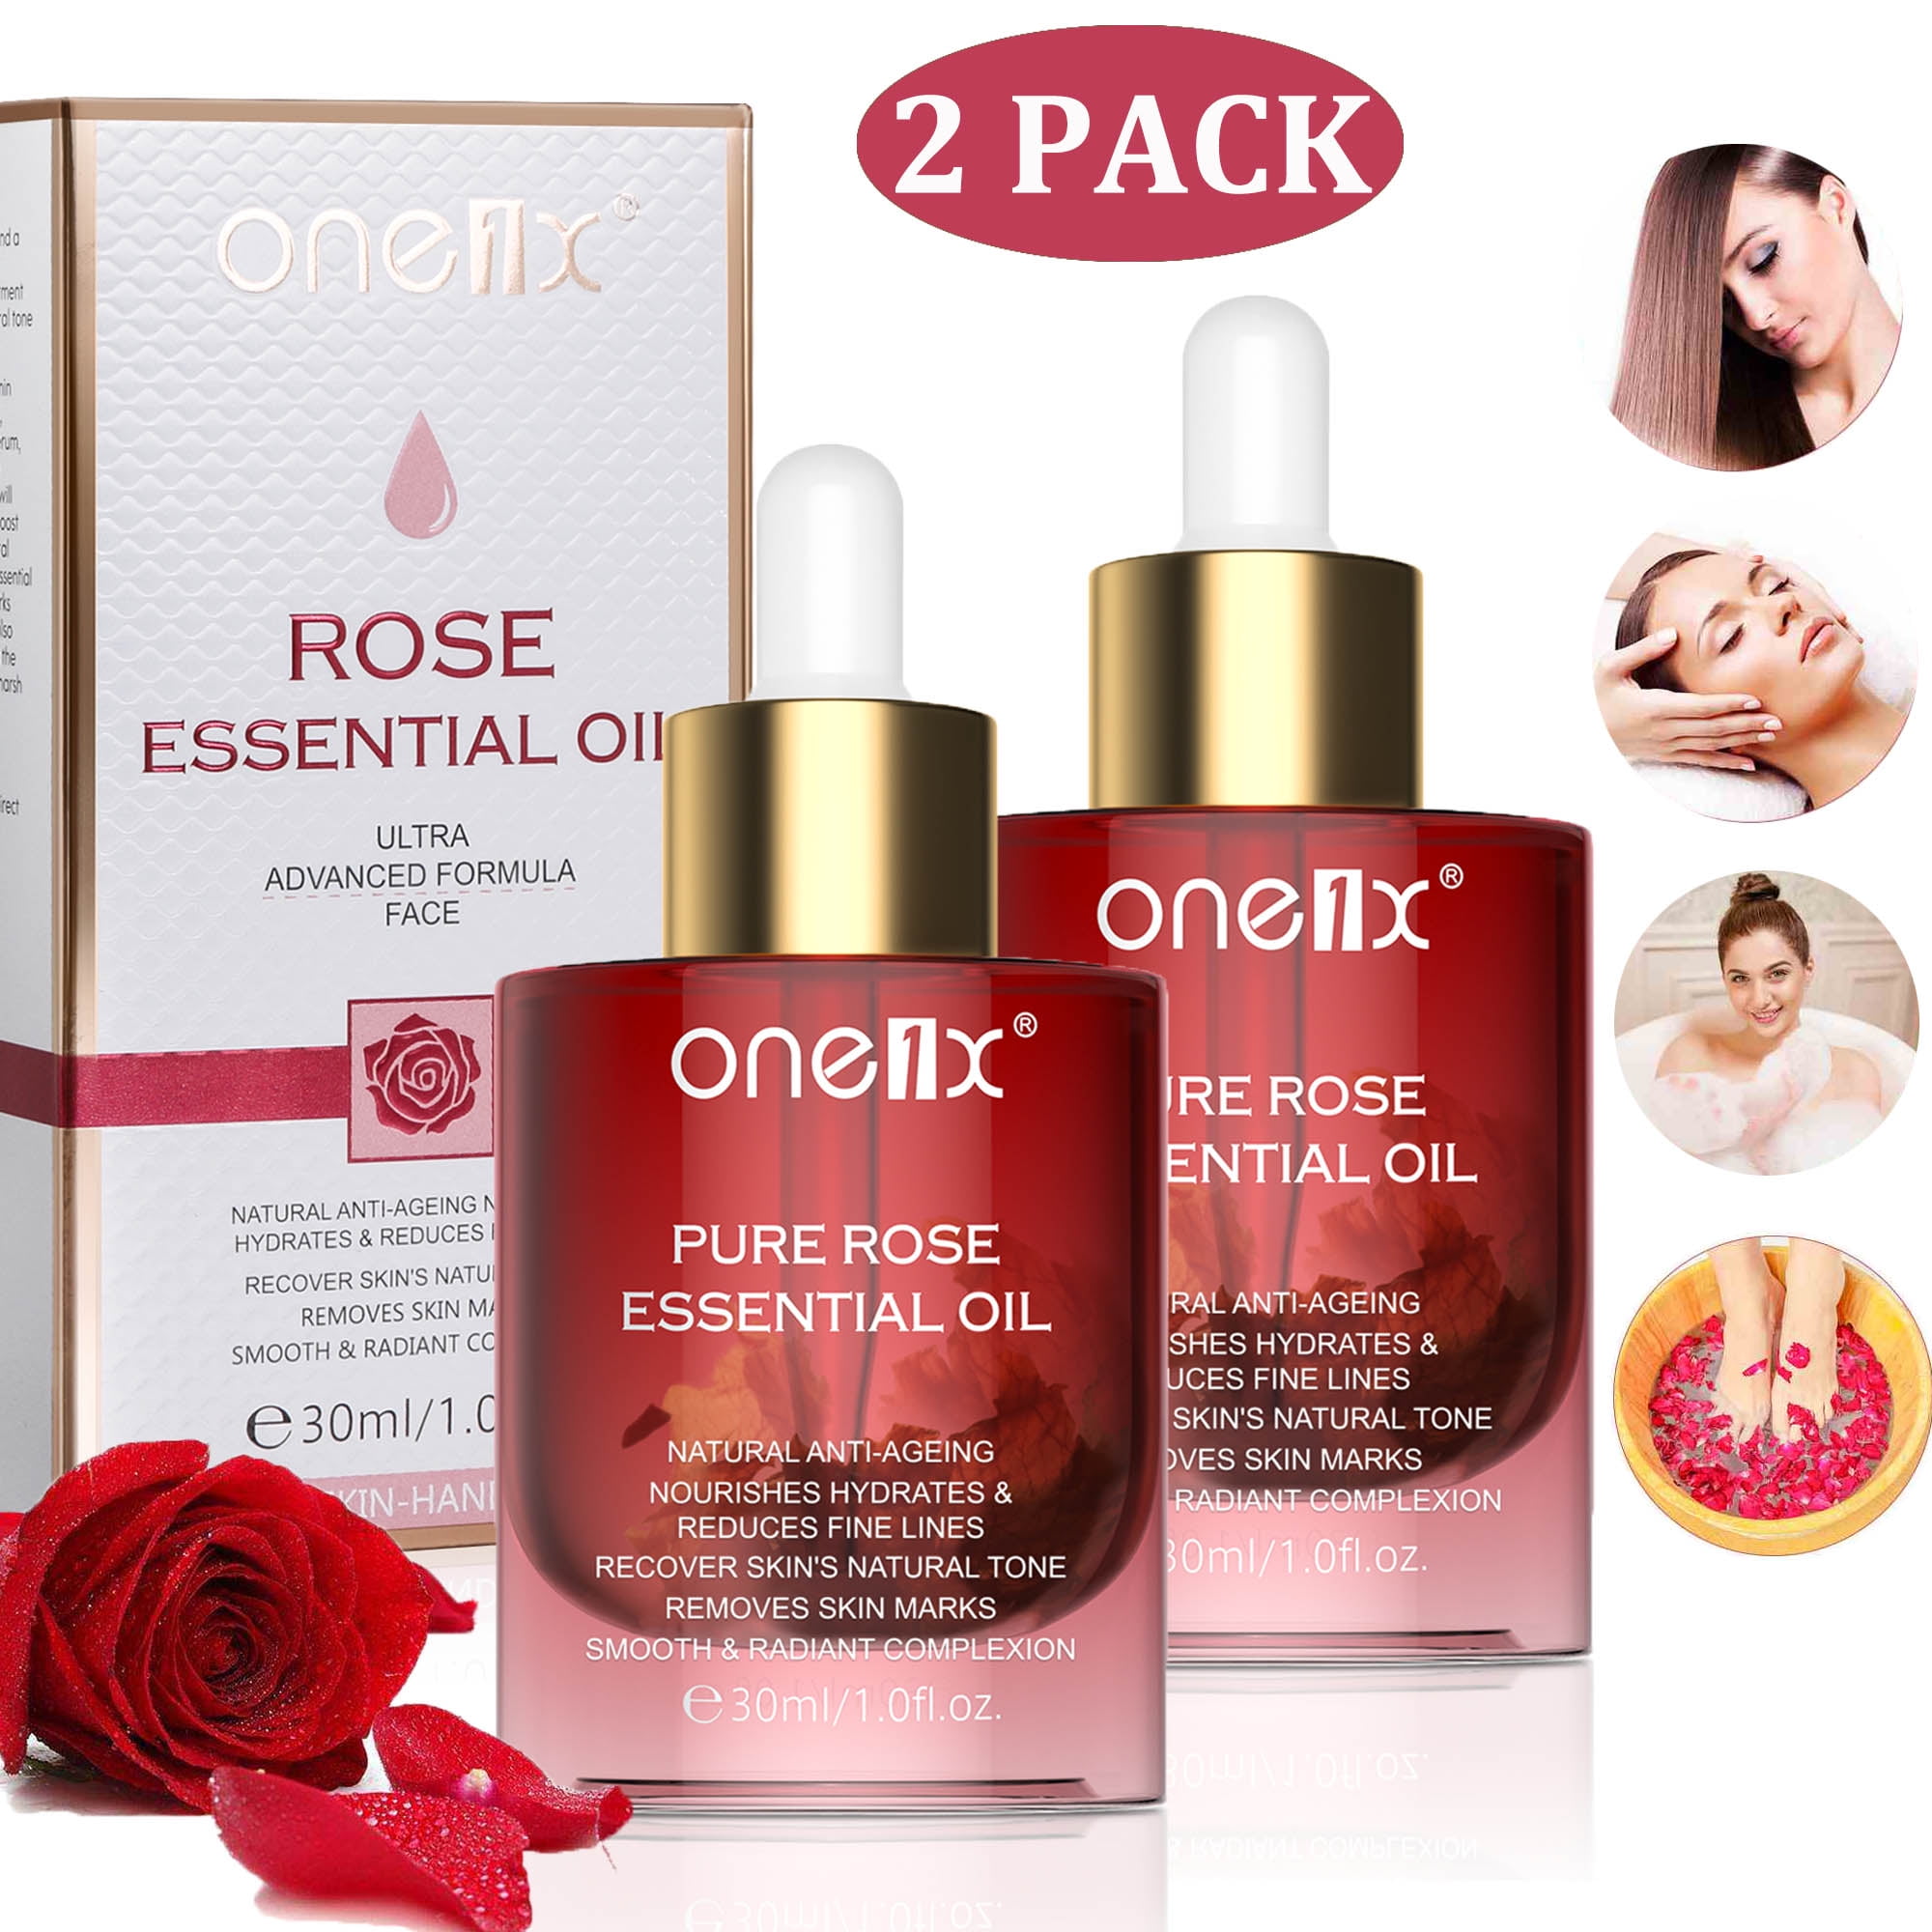 This Rose Inspired Skincare Set from Aromatica Left My Skin Soft and R